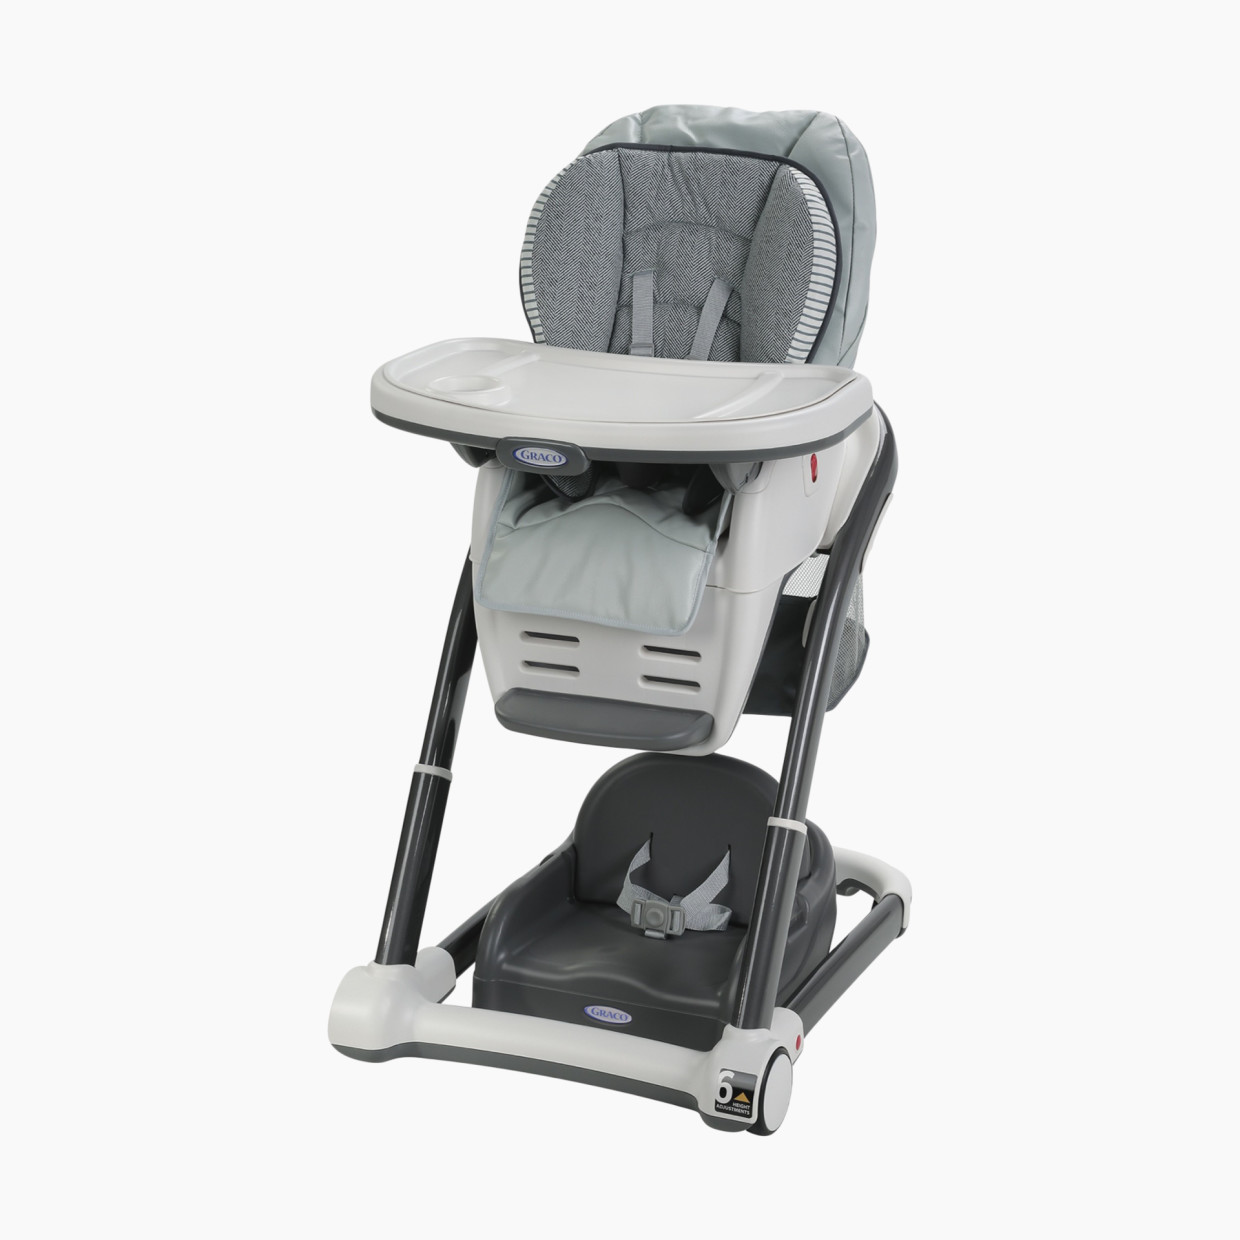 Graco Blossom LX 6-in-1 Convertible Highchair - Raleigh.